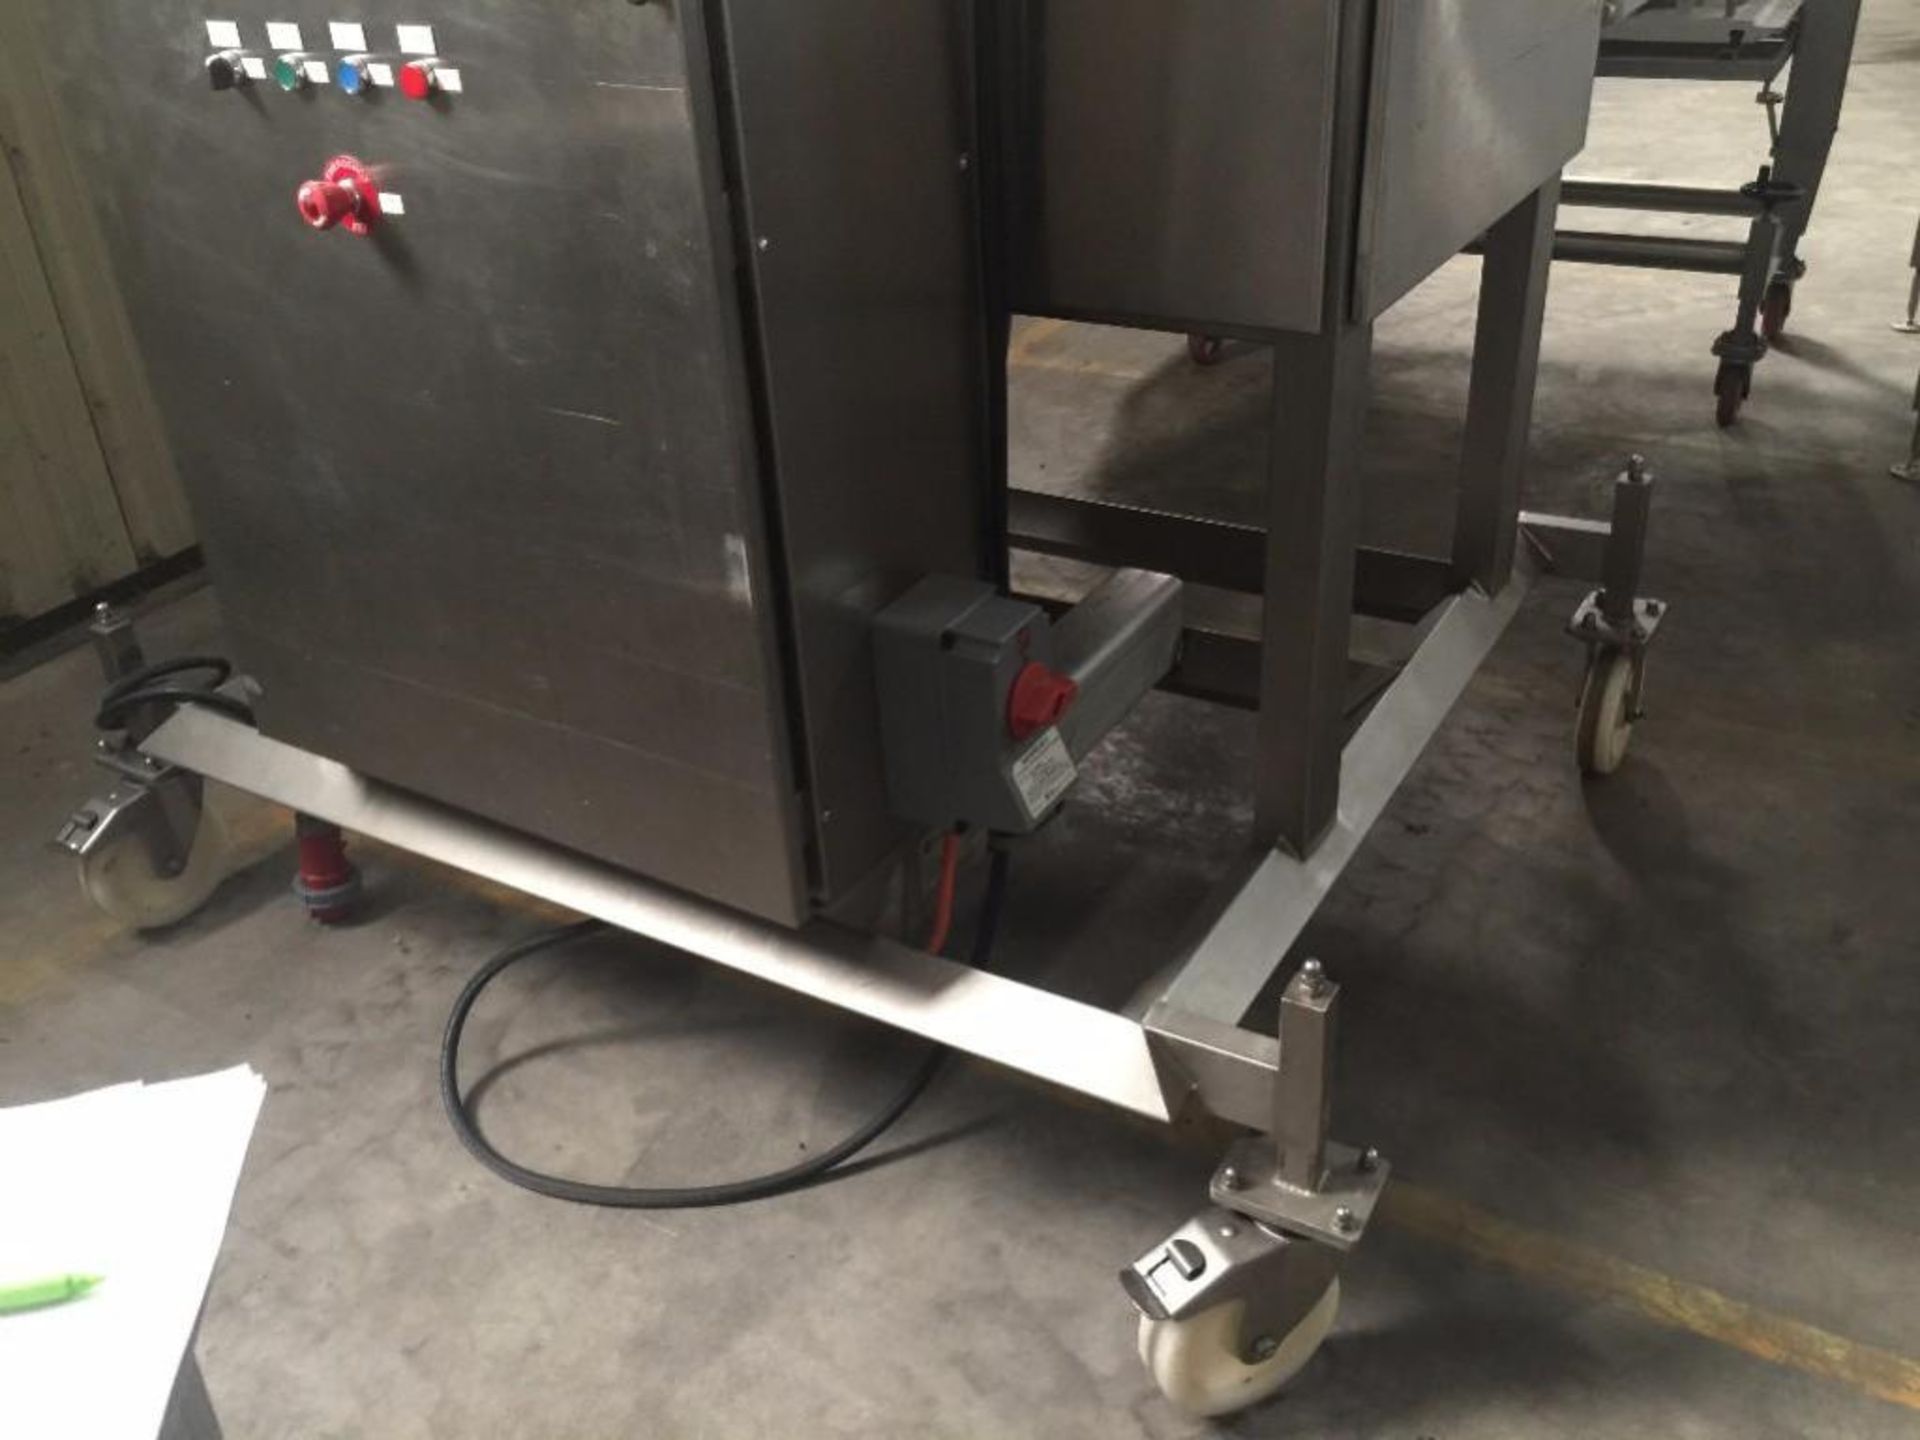 2009 Mondini cheese doser, model DF/GS-4, on wheels, with controls, panelview plus 750 controls and - Image 23 of 26